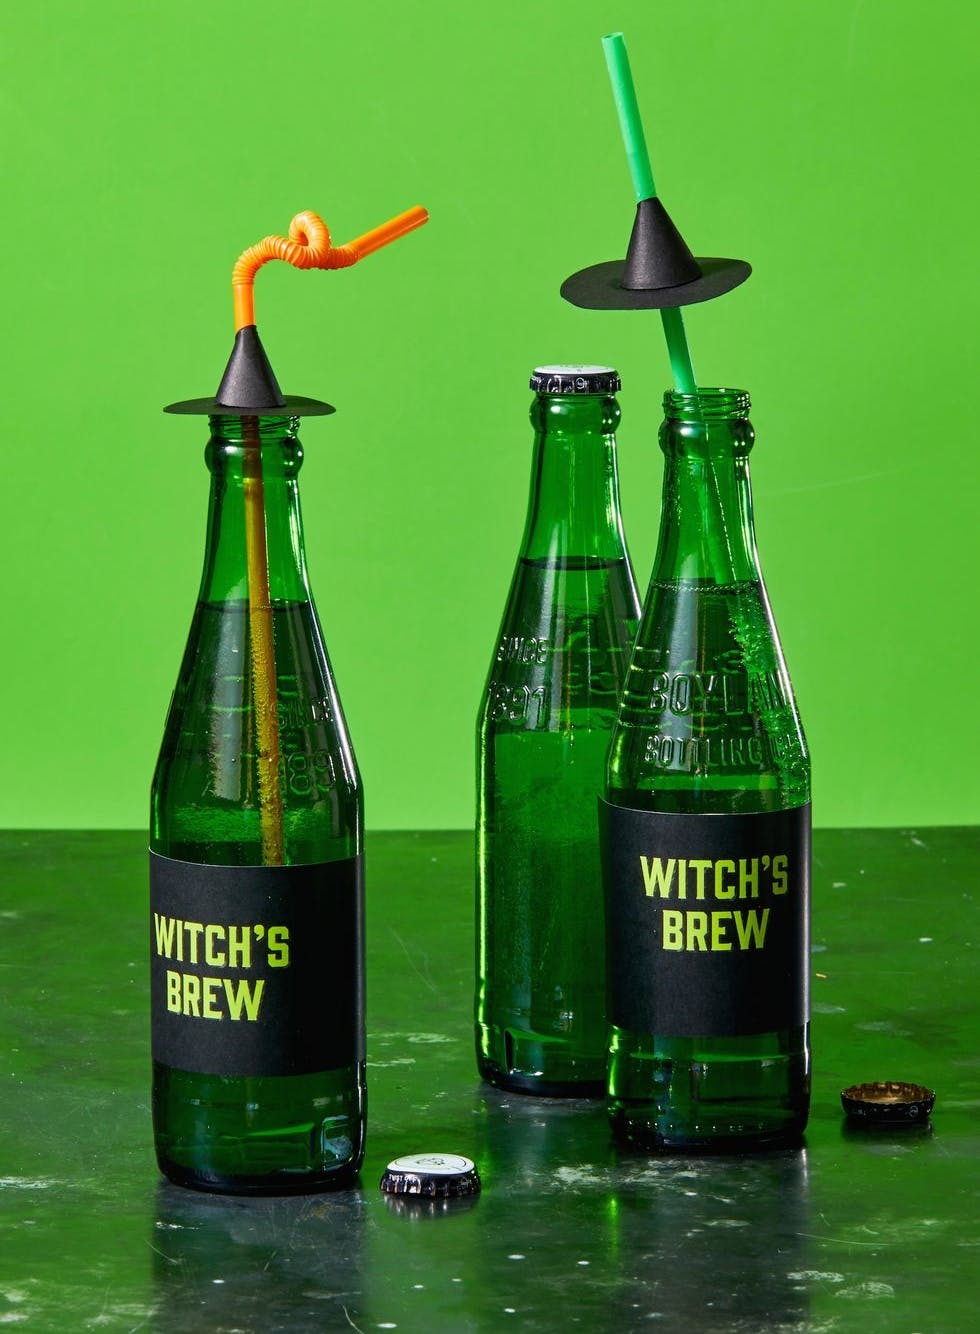 Three green glass bottles wrapped in black Witch's Brew labels sitting on a green table with a green background.